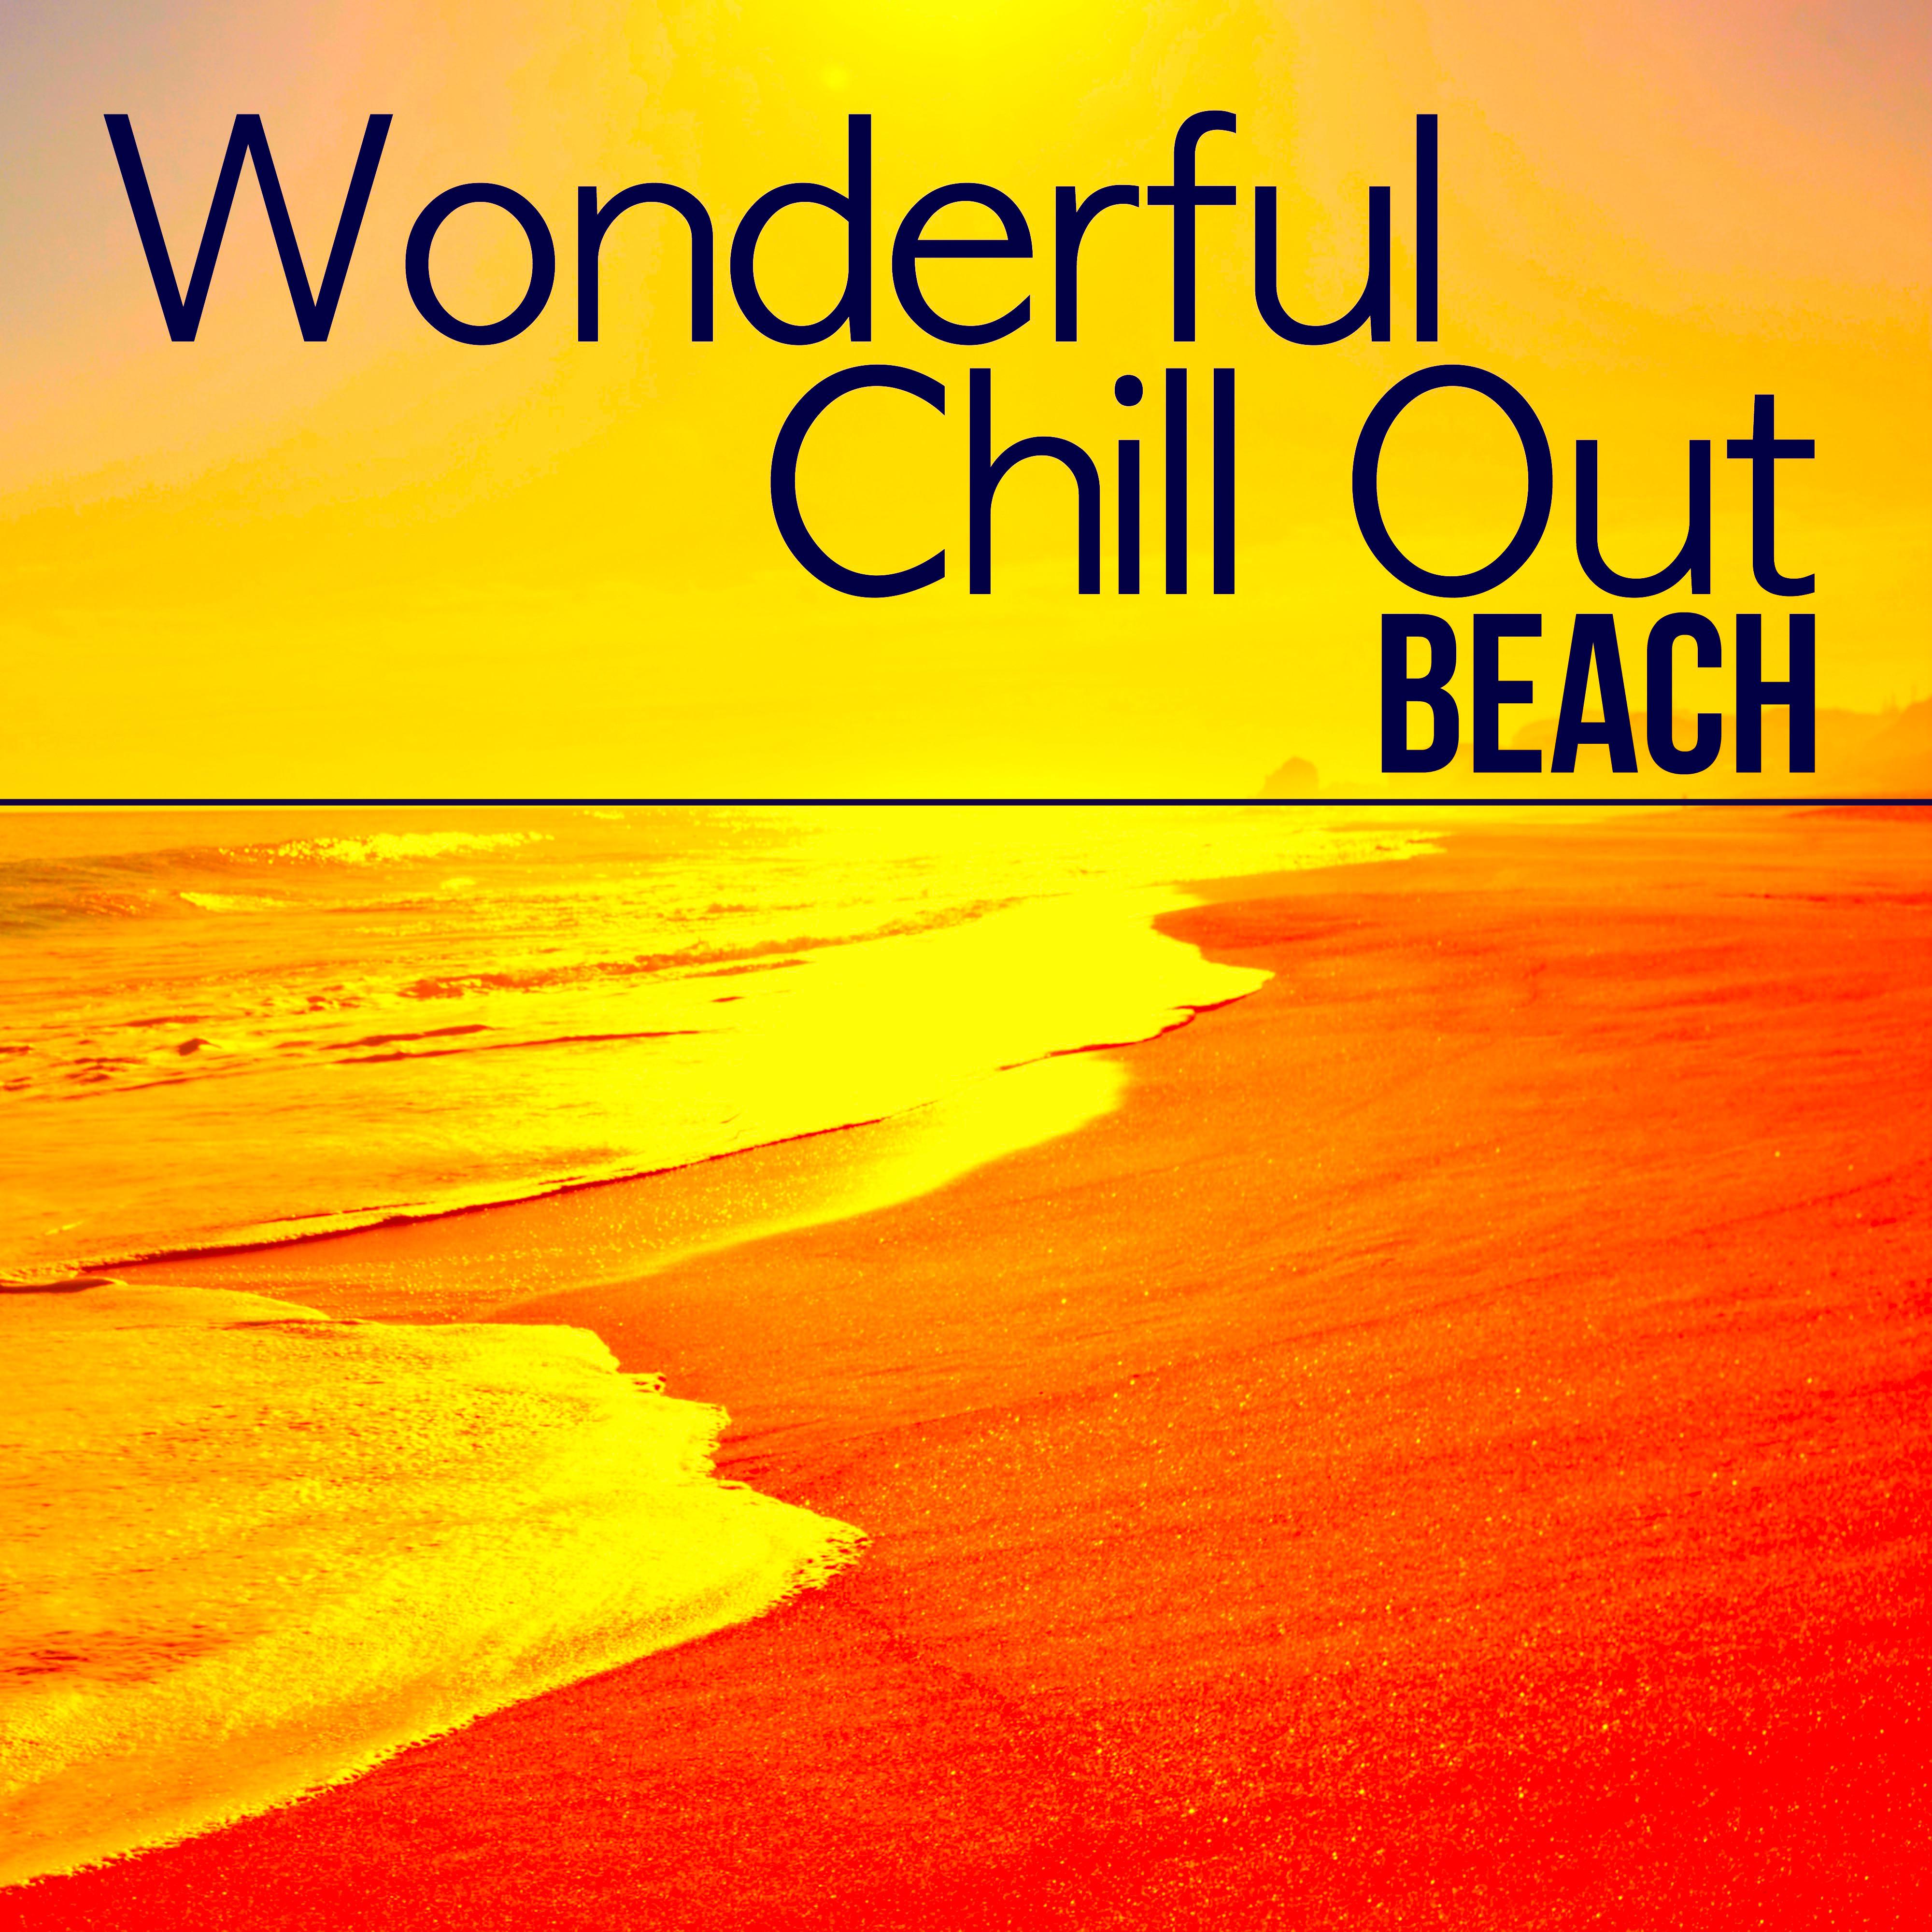 Wonderful Chill Out Beach Lounge Music Collection - Buddha Music Bar for Deep Relaxation, Feelings, Emotions & Good Vibes